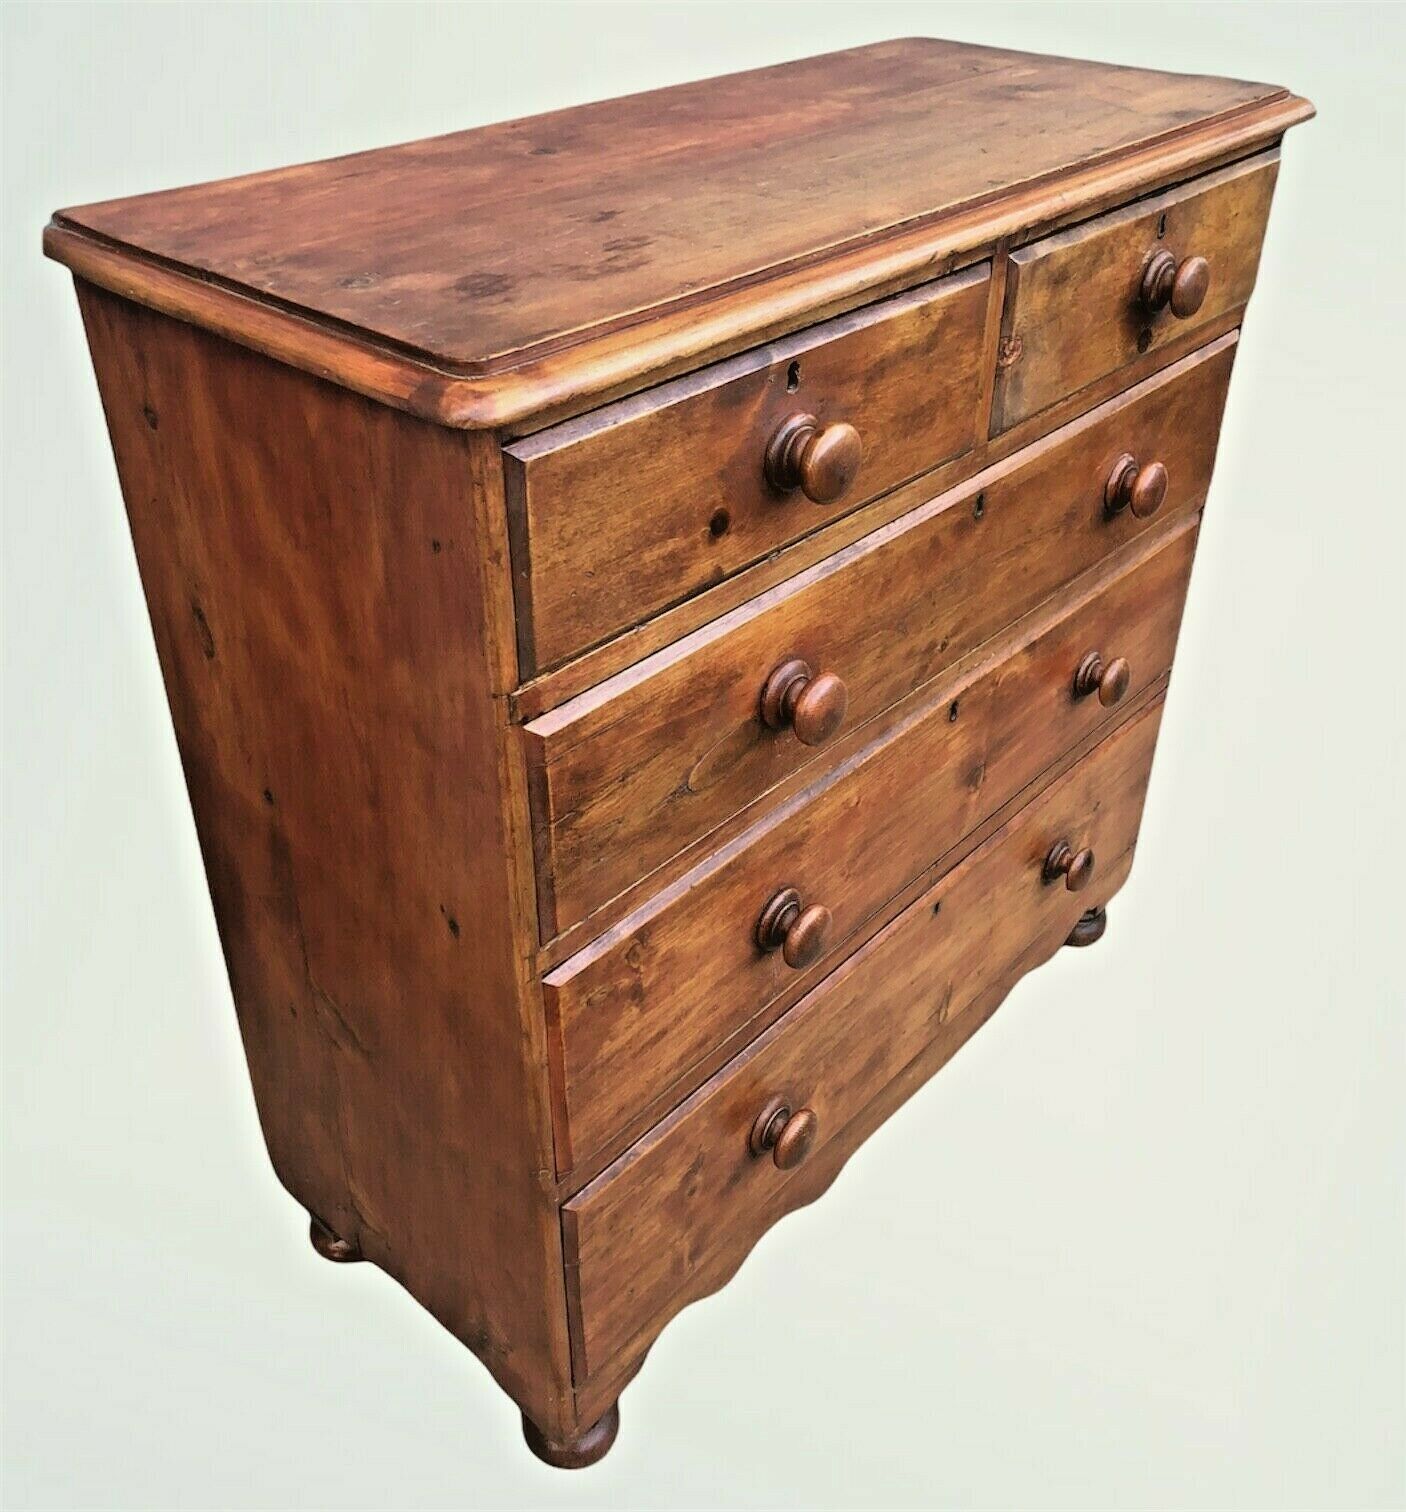 033.....Handsome Country House Stained Pine Chest Of Drawers ( sold )